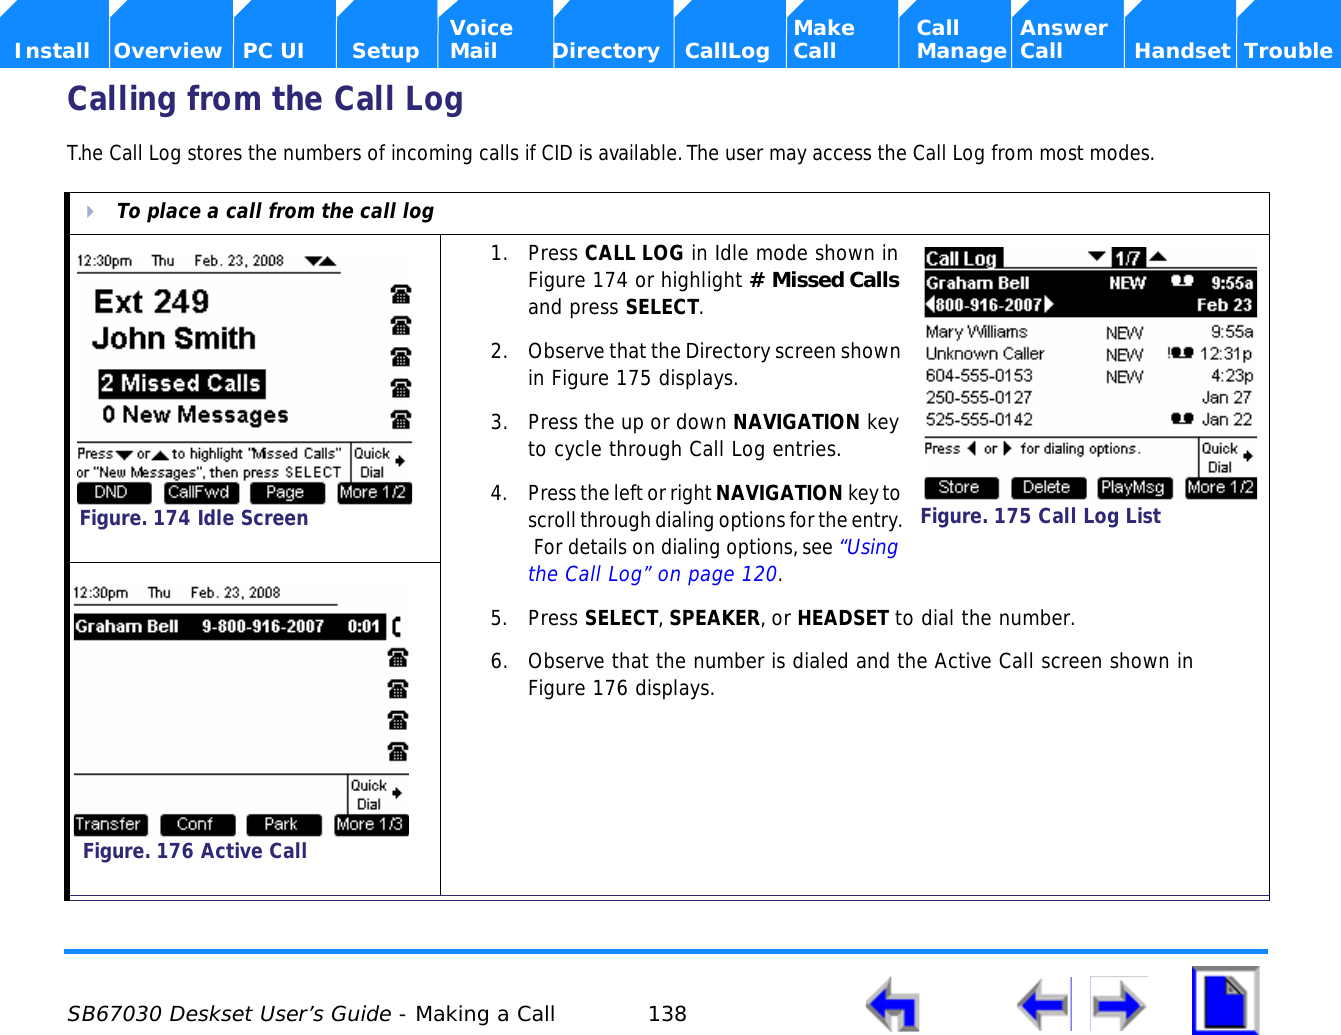  SB67030 Deskset User’s Guide - Making a Call 138    Voice Make Call Answer  Install Overview PC UI Setup Mail Directory CallLog Call Manage Call Handset TroubleCalling from the Call Log T.he Call Log stores the numbers of incoming calls if CID is available. The user may access the Call Log from most modes.To place a call from the call log1. Press CALL LOG in Idle mode shown in Figure 174 or highlight # Missed Calls and press SELECT.2. Observe that the Directory screen shown in Figure 175 displays.3. Press the up or down NAVIGATION key to cycle through Call Log entries.4. Press the left or right NAVIGATION key to scroll through dialing options for the entry.  For details on dialing options, see “Using the Call Log” on page 120.5. Press SELECT, SPEAKER, or HEADSET to dial the number.6. Observe that the number is dialed and the Active Call screen shown in Figure 176 displays.Figure. 174 Idle ScreenFigure. 175 Call Log ListFigure. 176 Active Call